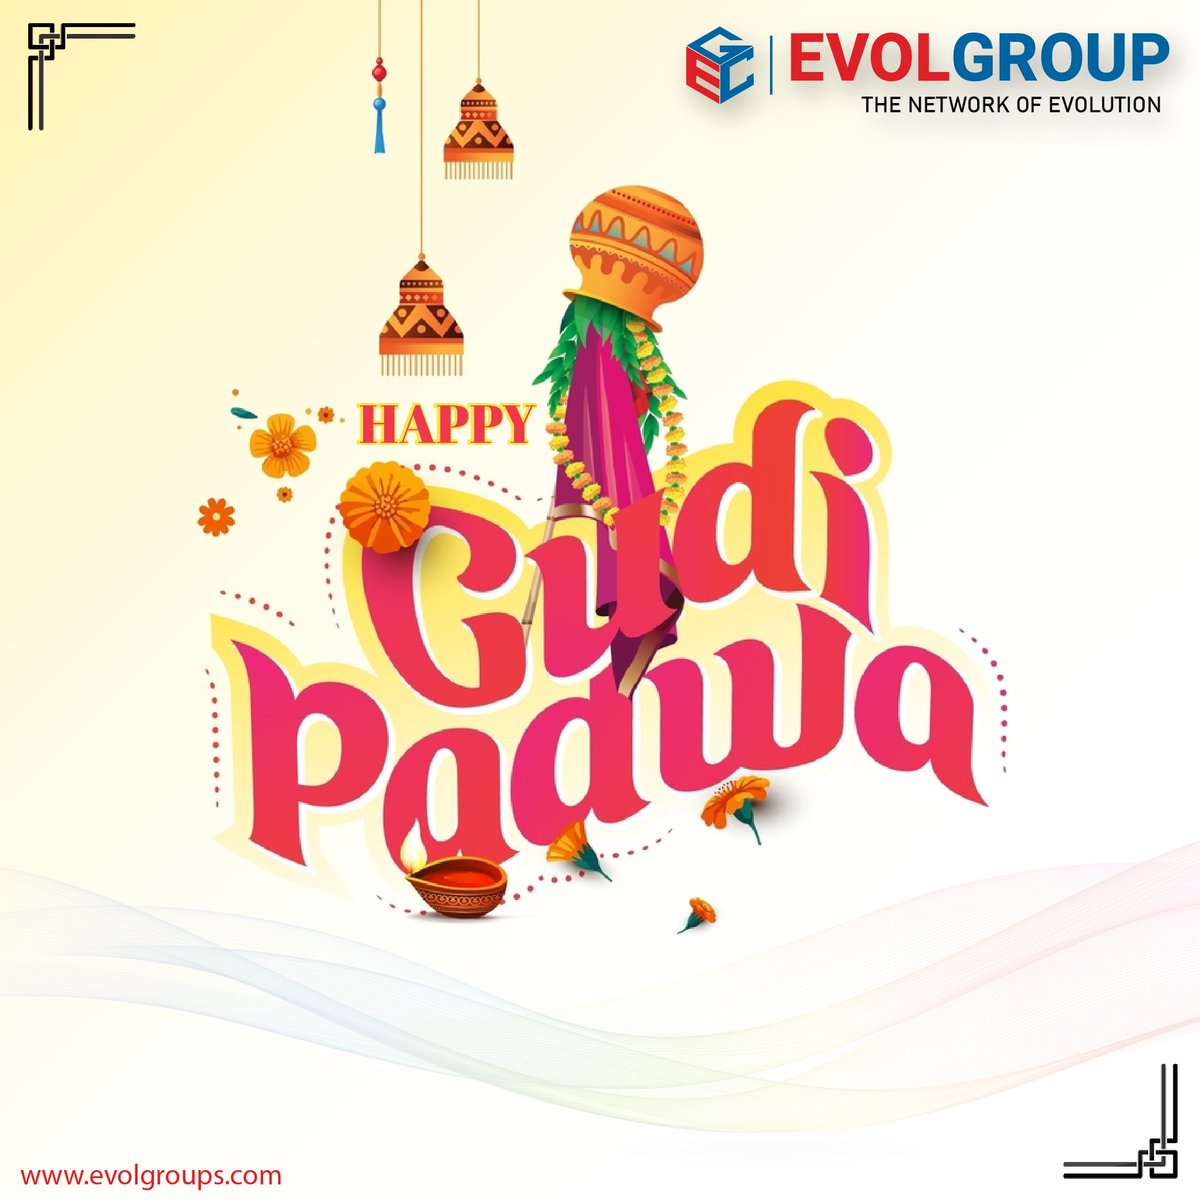 Step into the New Year with hope and joy!  Gudi Padwa brings with it new beginnings and countlespossibilities. May this auspicious festival fill your home with happiness, prosperity.
.
.
#happygudipadwa #evoltechnobitsdigital #evolgroup #gudipadwa2024 #JoyfulCelebrations